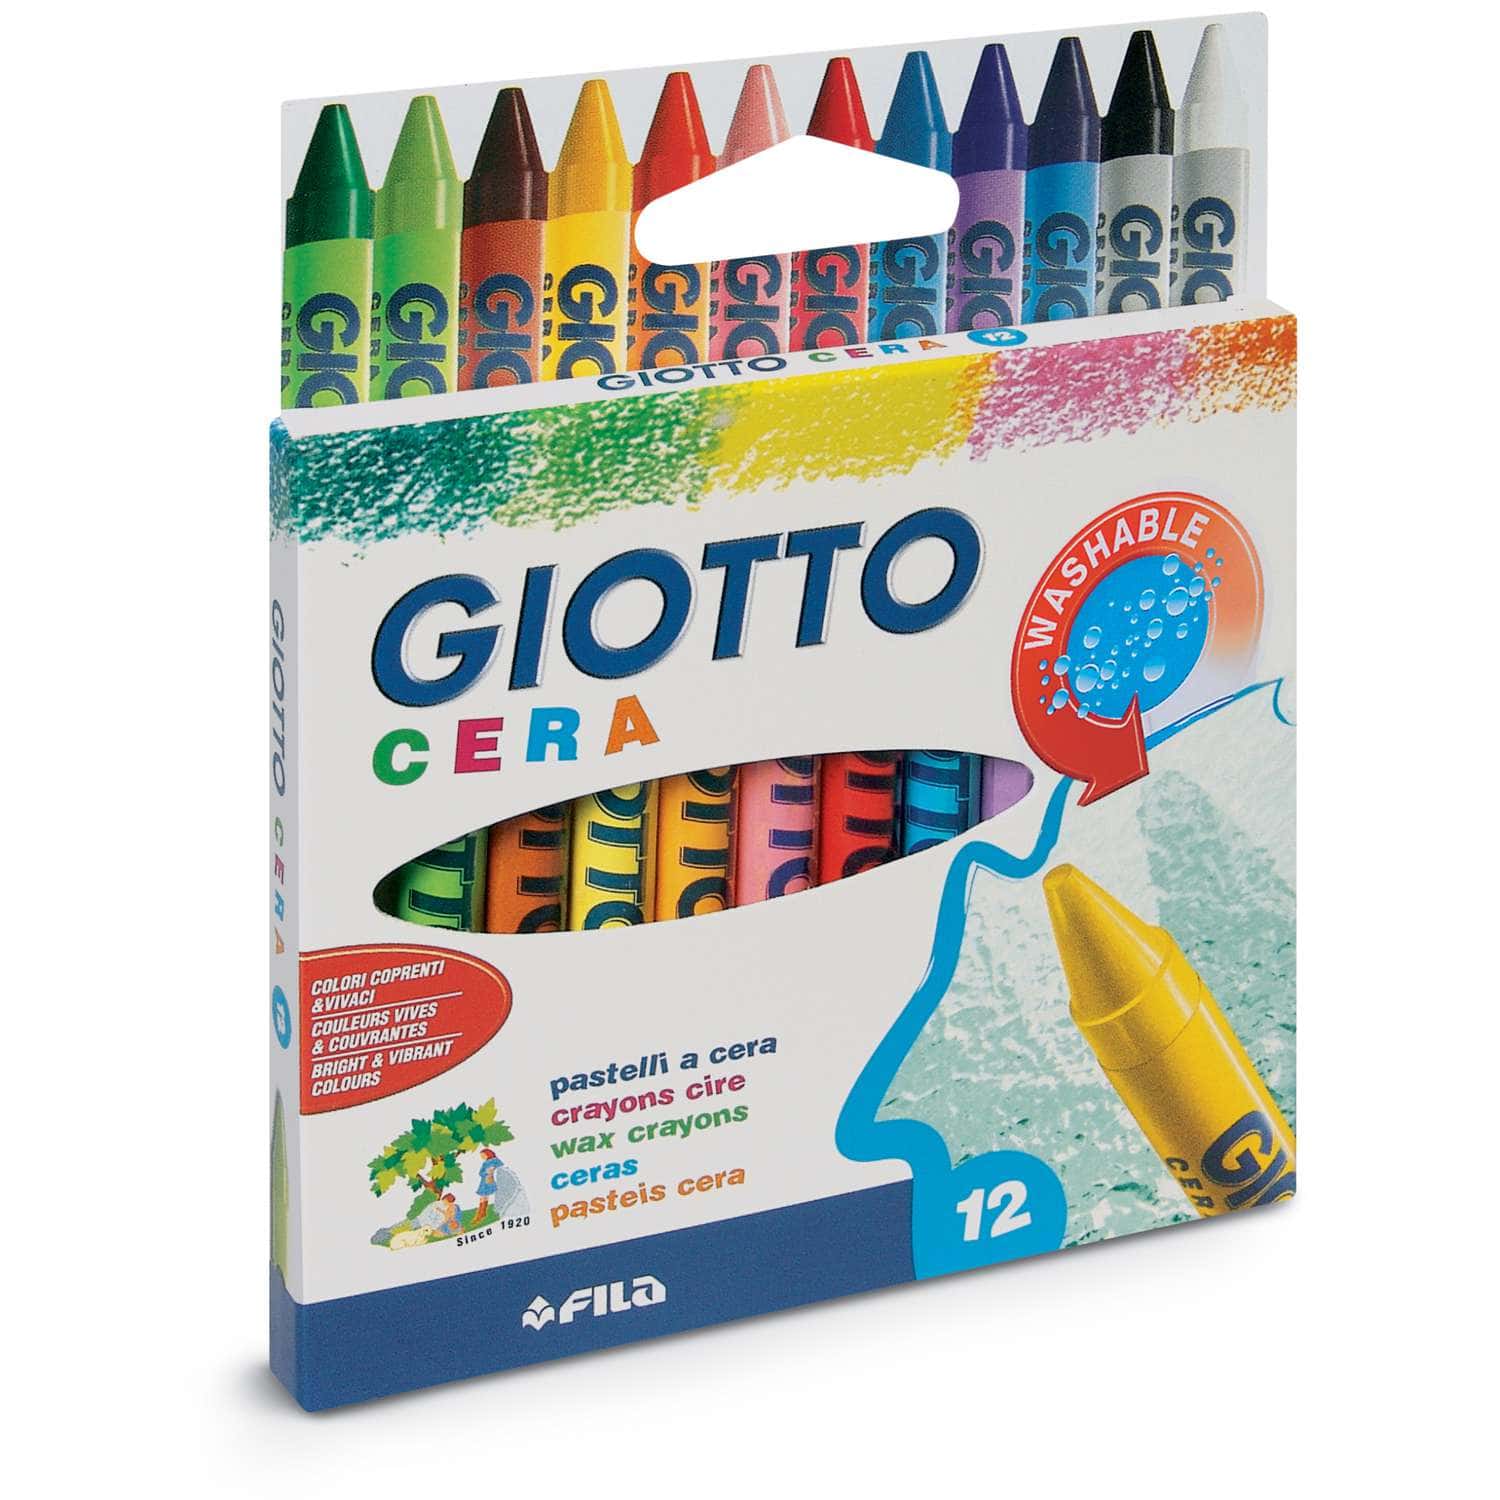 https://images.greatart.co.uk/out/pictures/generated/1500_1500/391645/Giotto+Cera+Wax+Crayon+Sets%2C+12+crayons.jpg